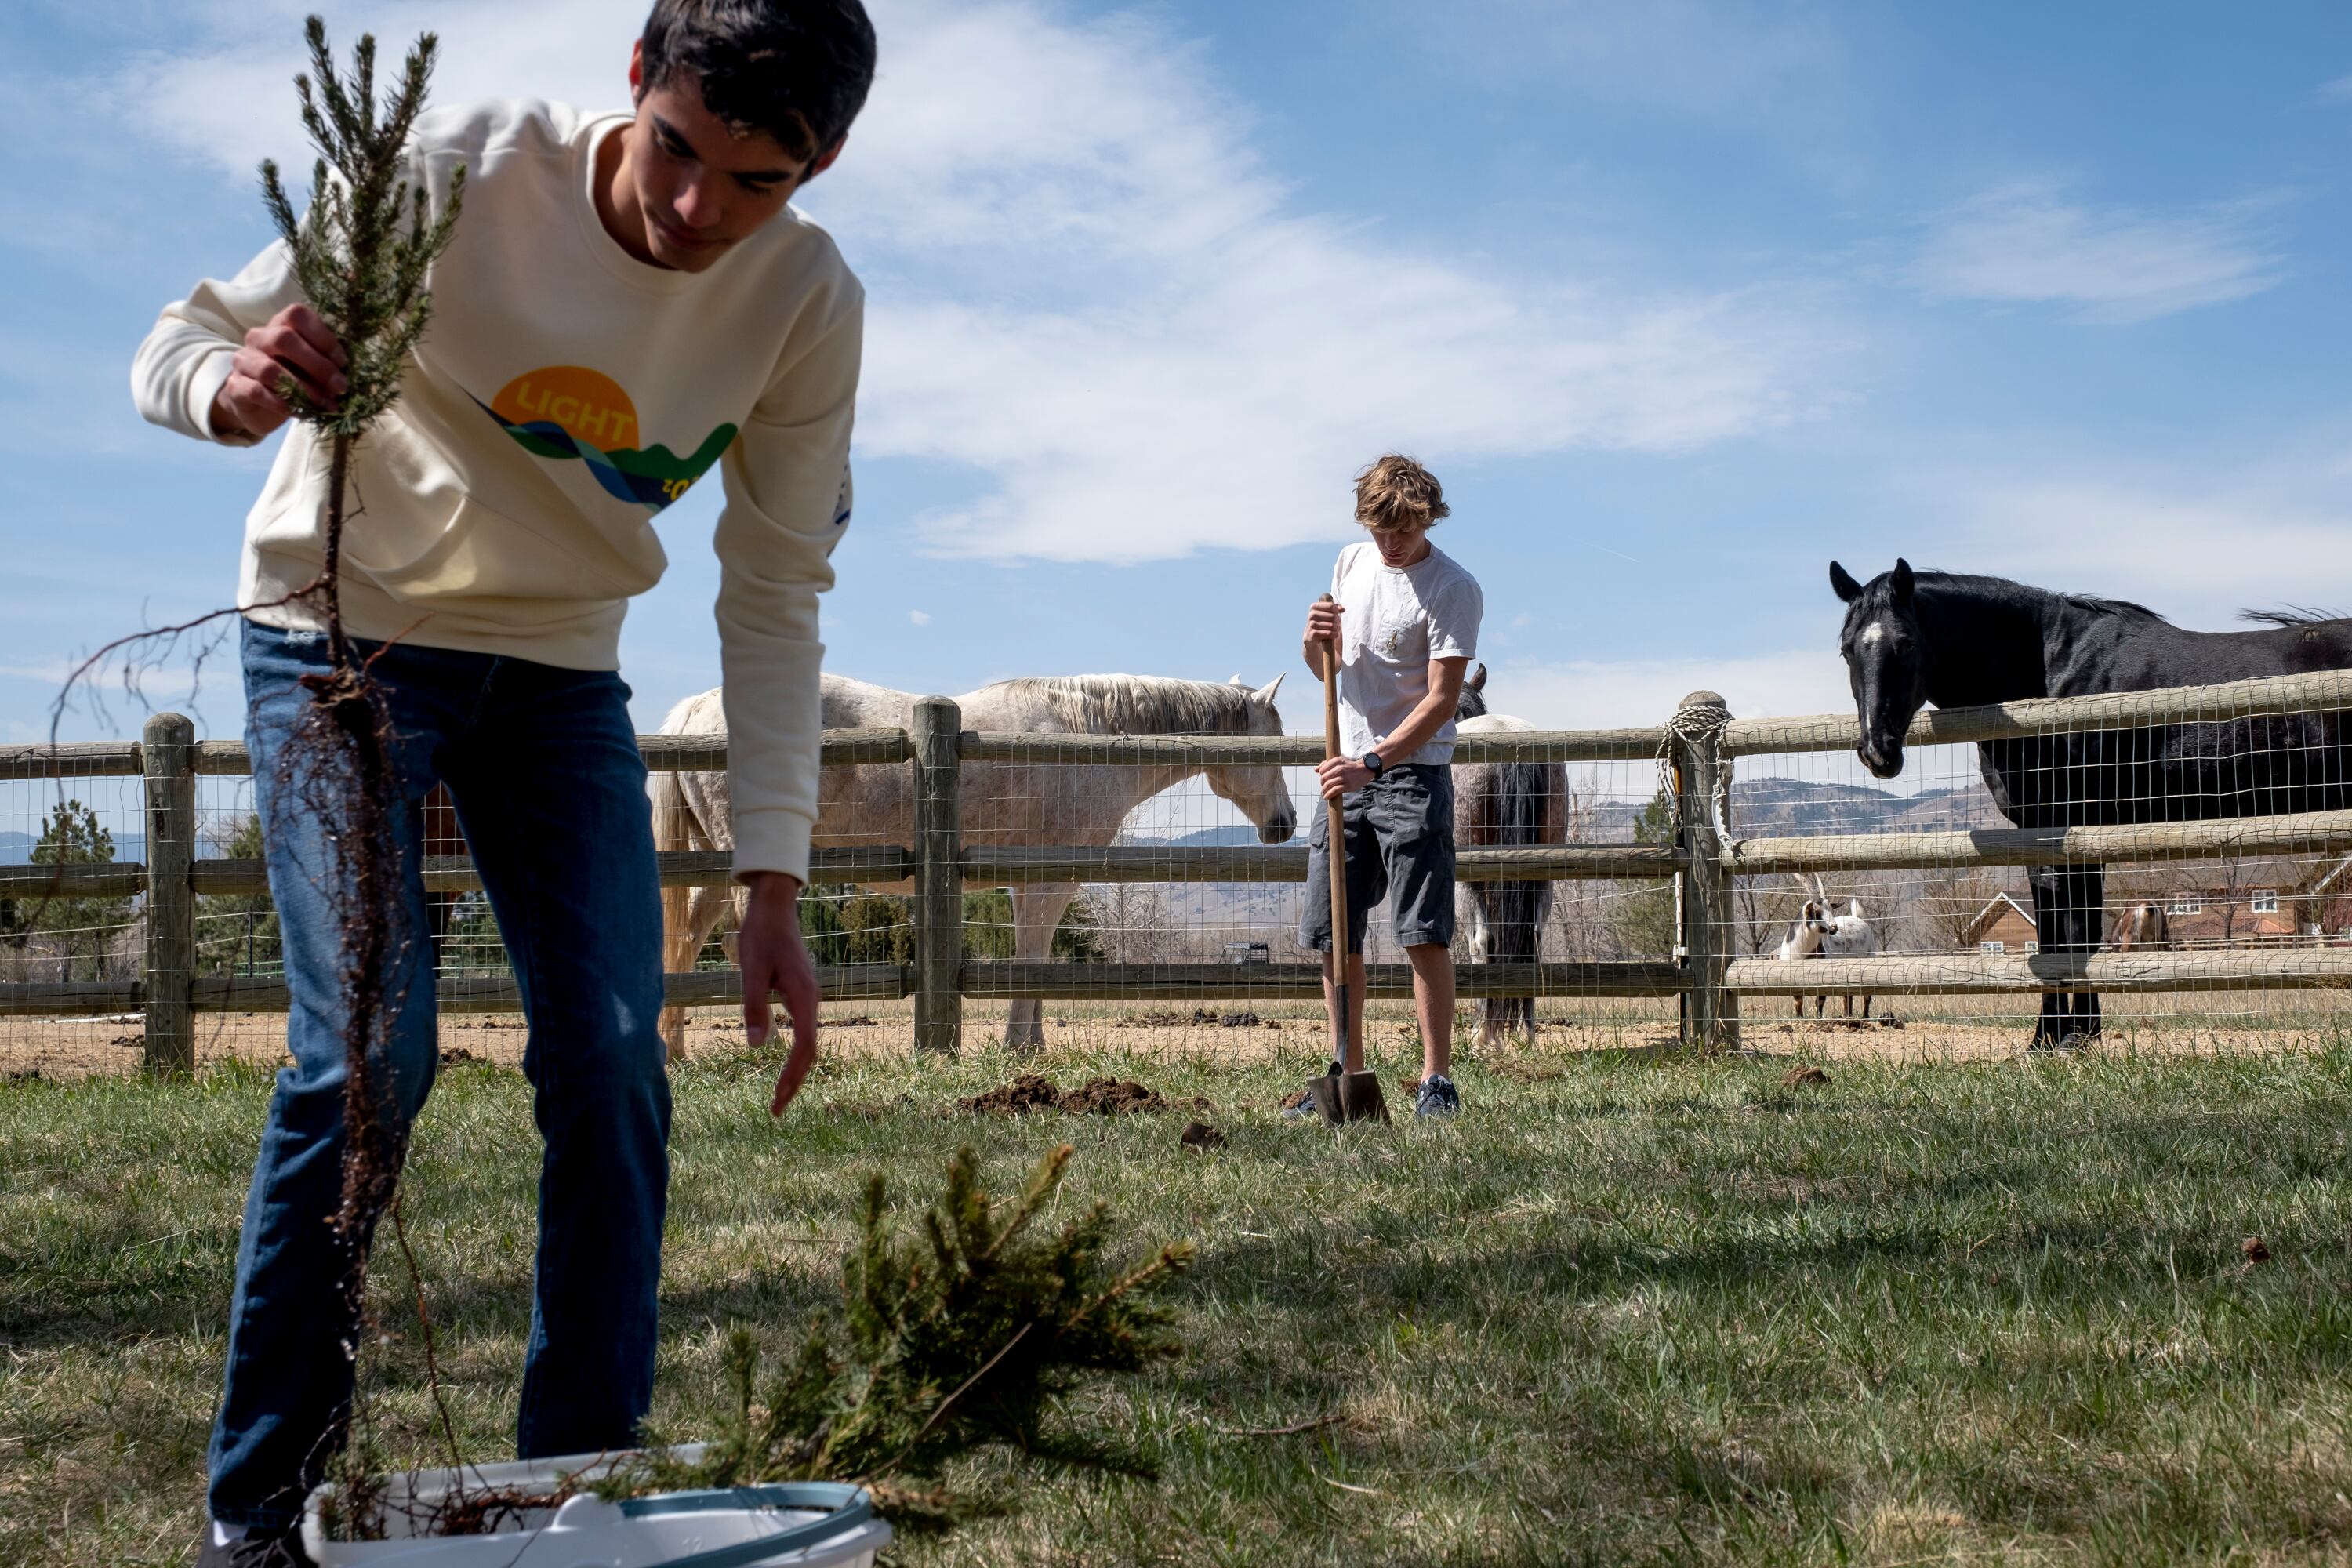 Two high school students plant trees in a field as horses look on from behind a wooden fence.